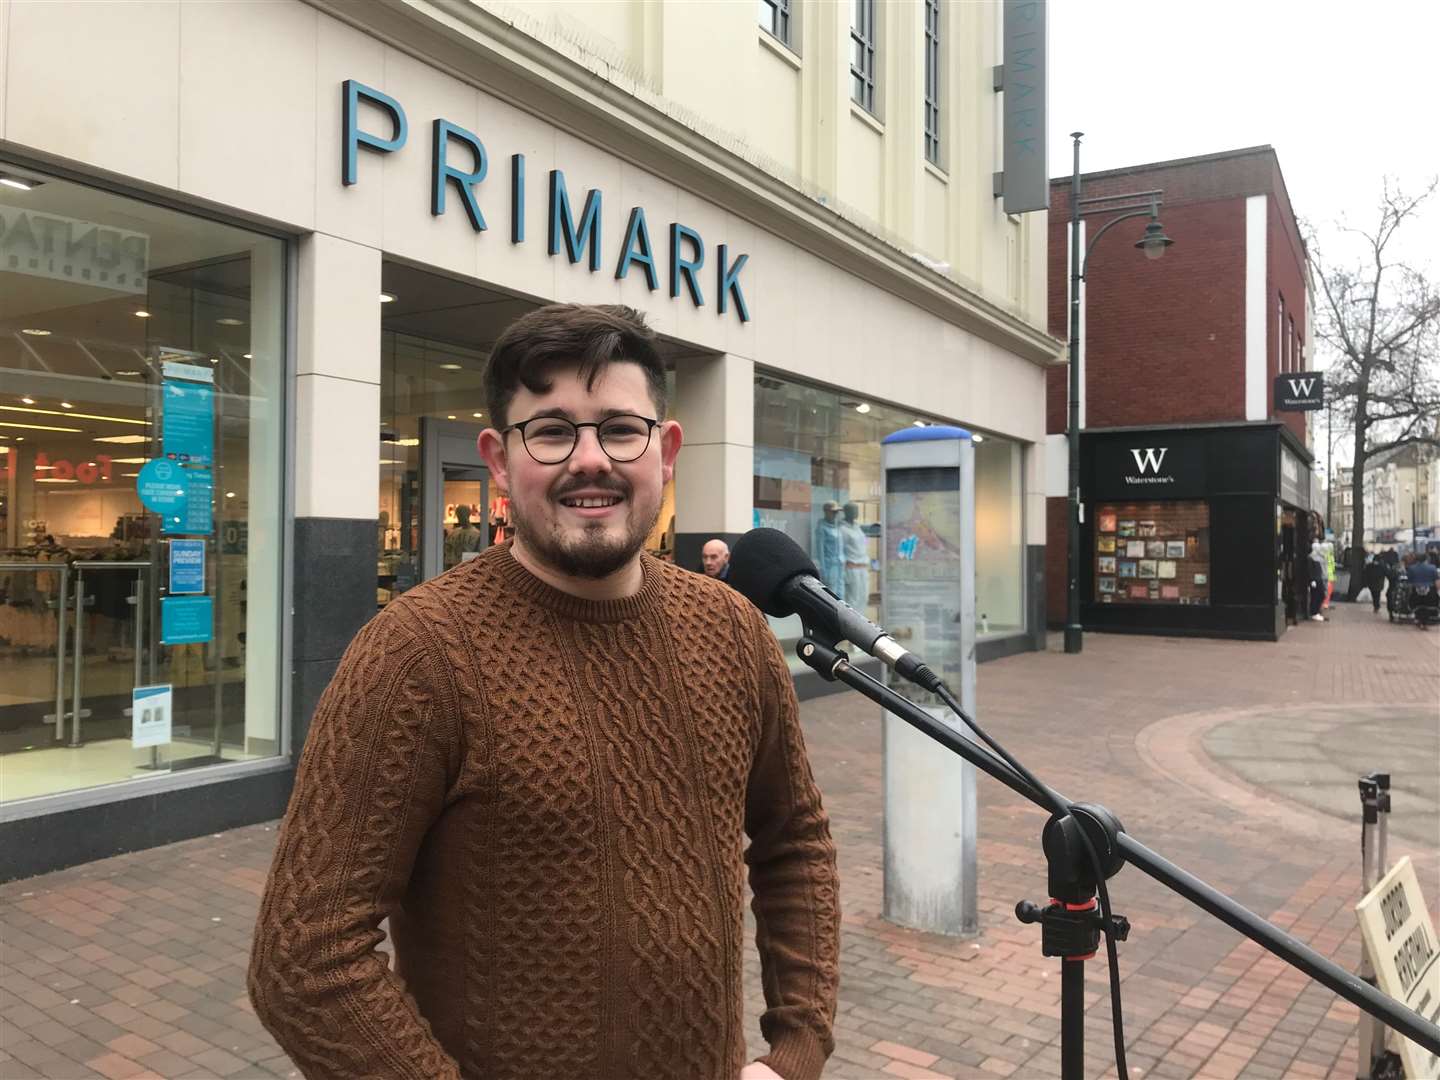 Busker Jordan Ravenhill said he was trying to cheer people up in Chatham